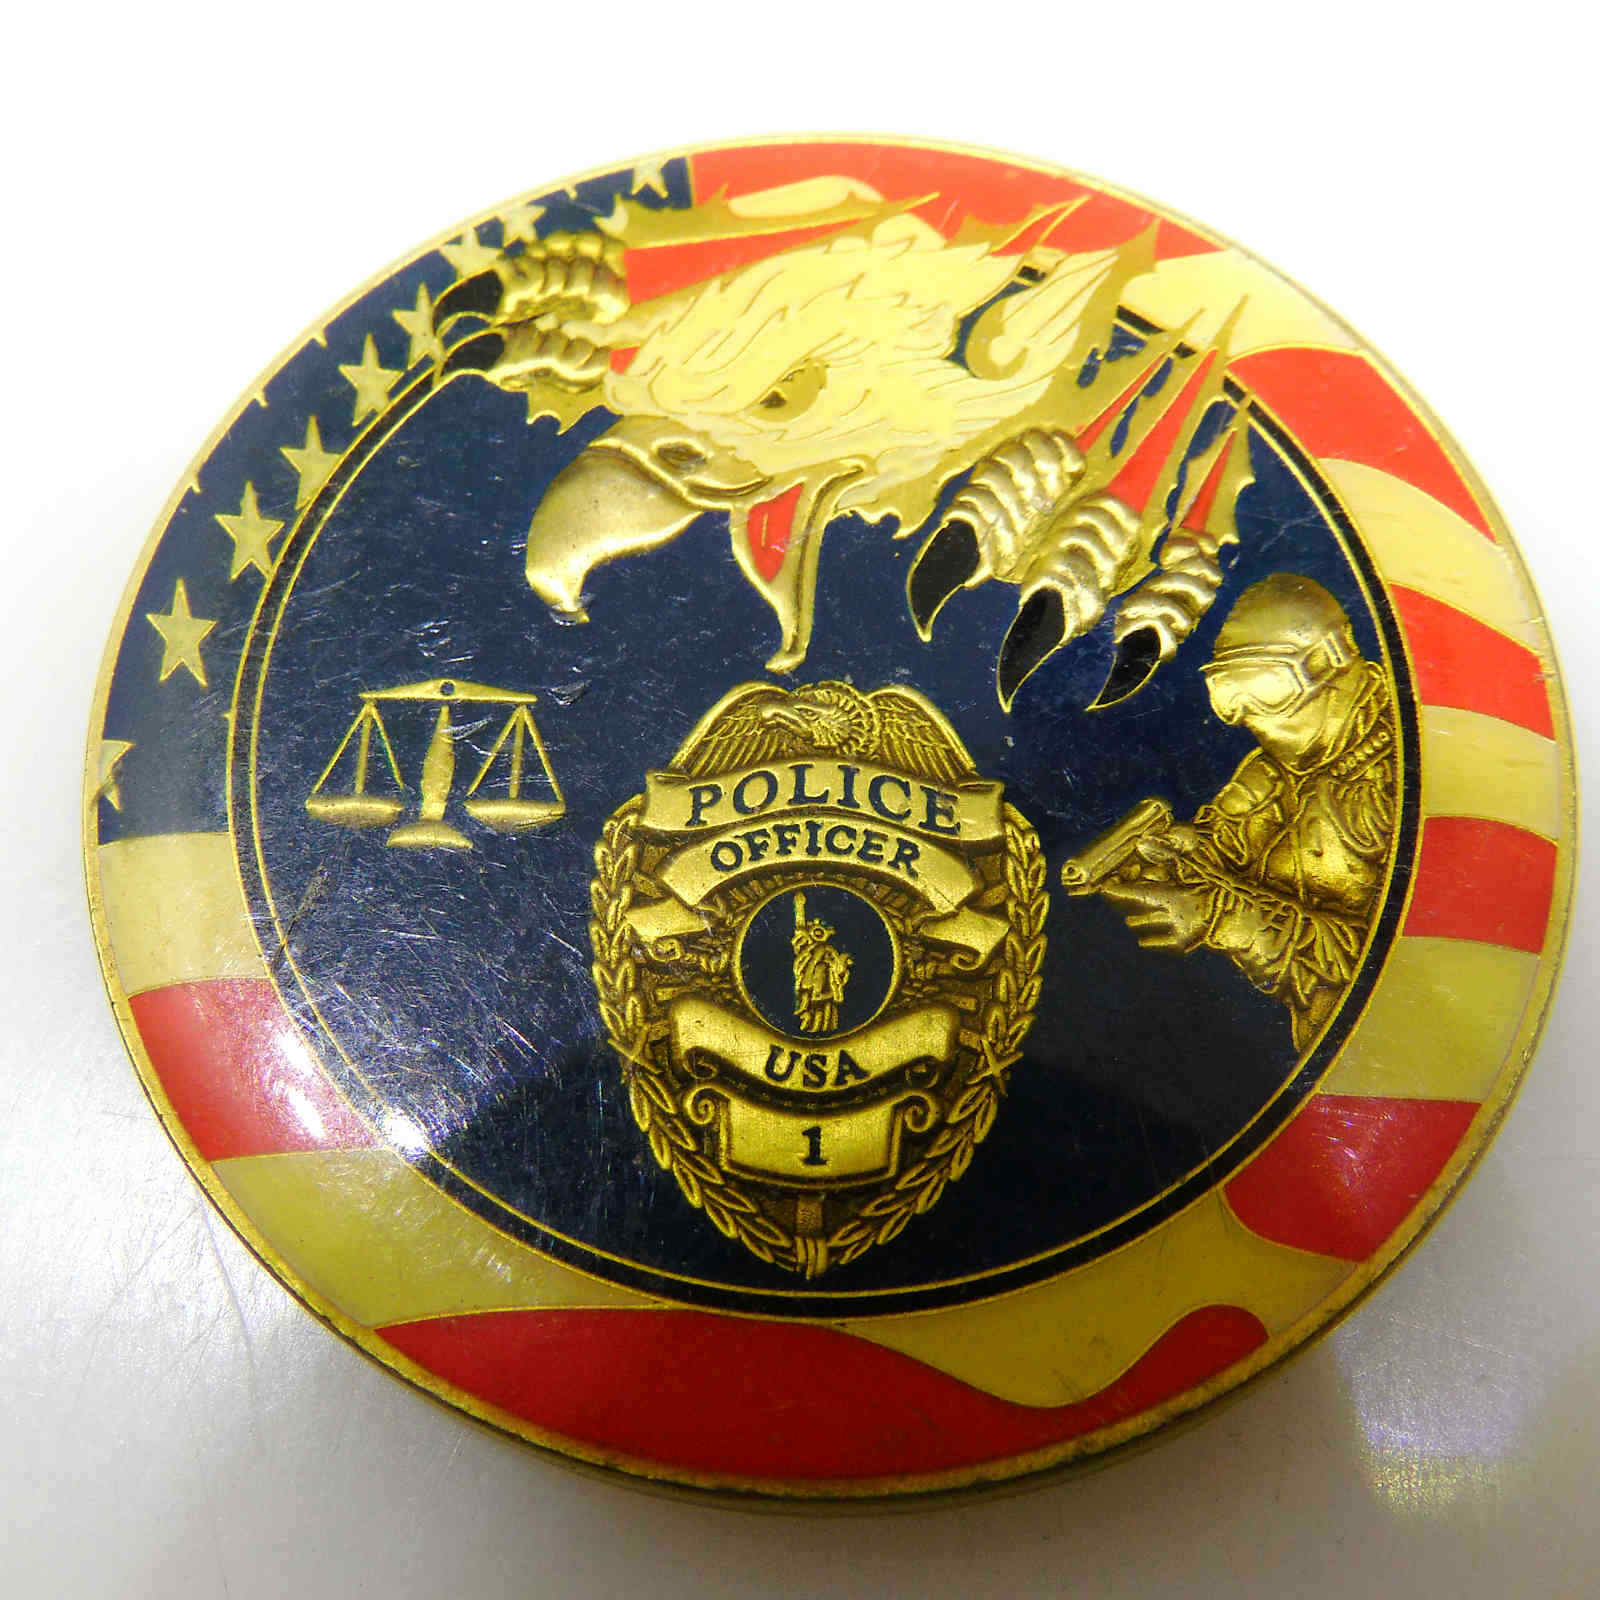 USA POLICE OFFICER TRUE HEROES CHALLENGE COIN